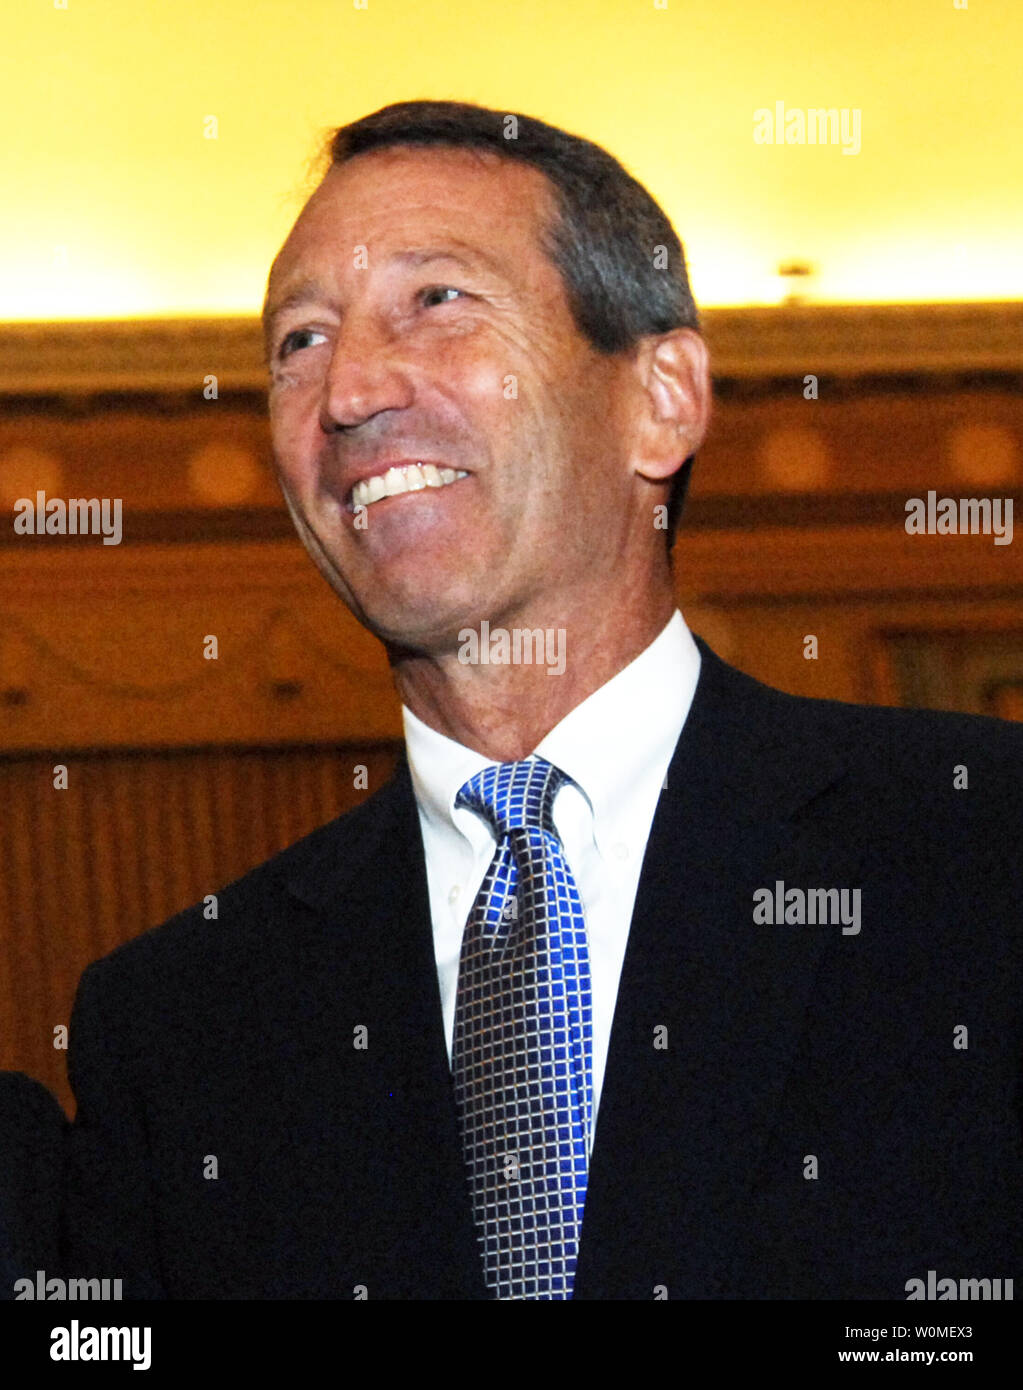 South Carolina Gov. Mark Sanford, seen in an October 29, 2008 file photo at a Committee on Ways and Means hearing on Capitol Hill in Washington, admitted to an extramarital affair on June 24, 2009, after he disappeared from South Carolina for a week, secretly traveling to Argentina with his mistress. (UPI Photo/Alexis C. Glenn/File) Stock Photo